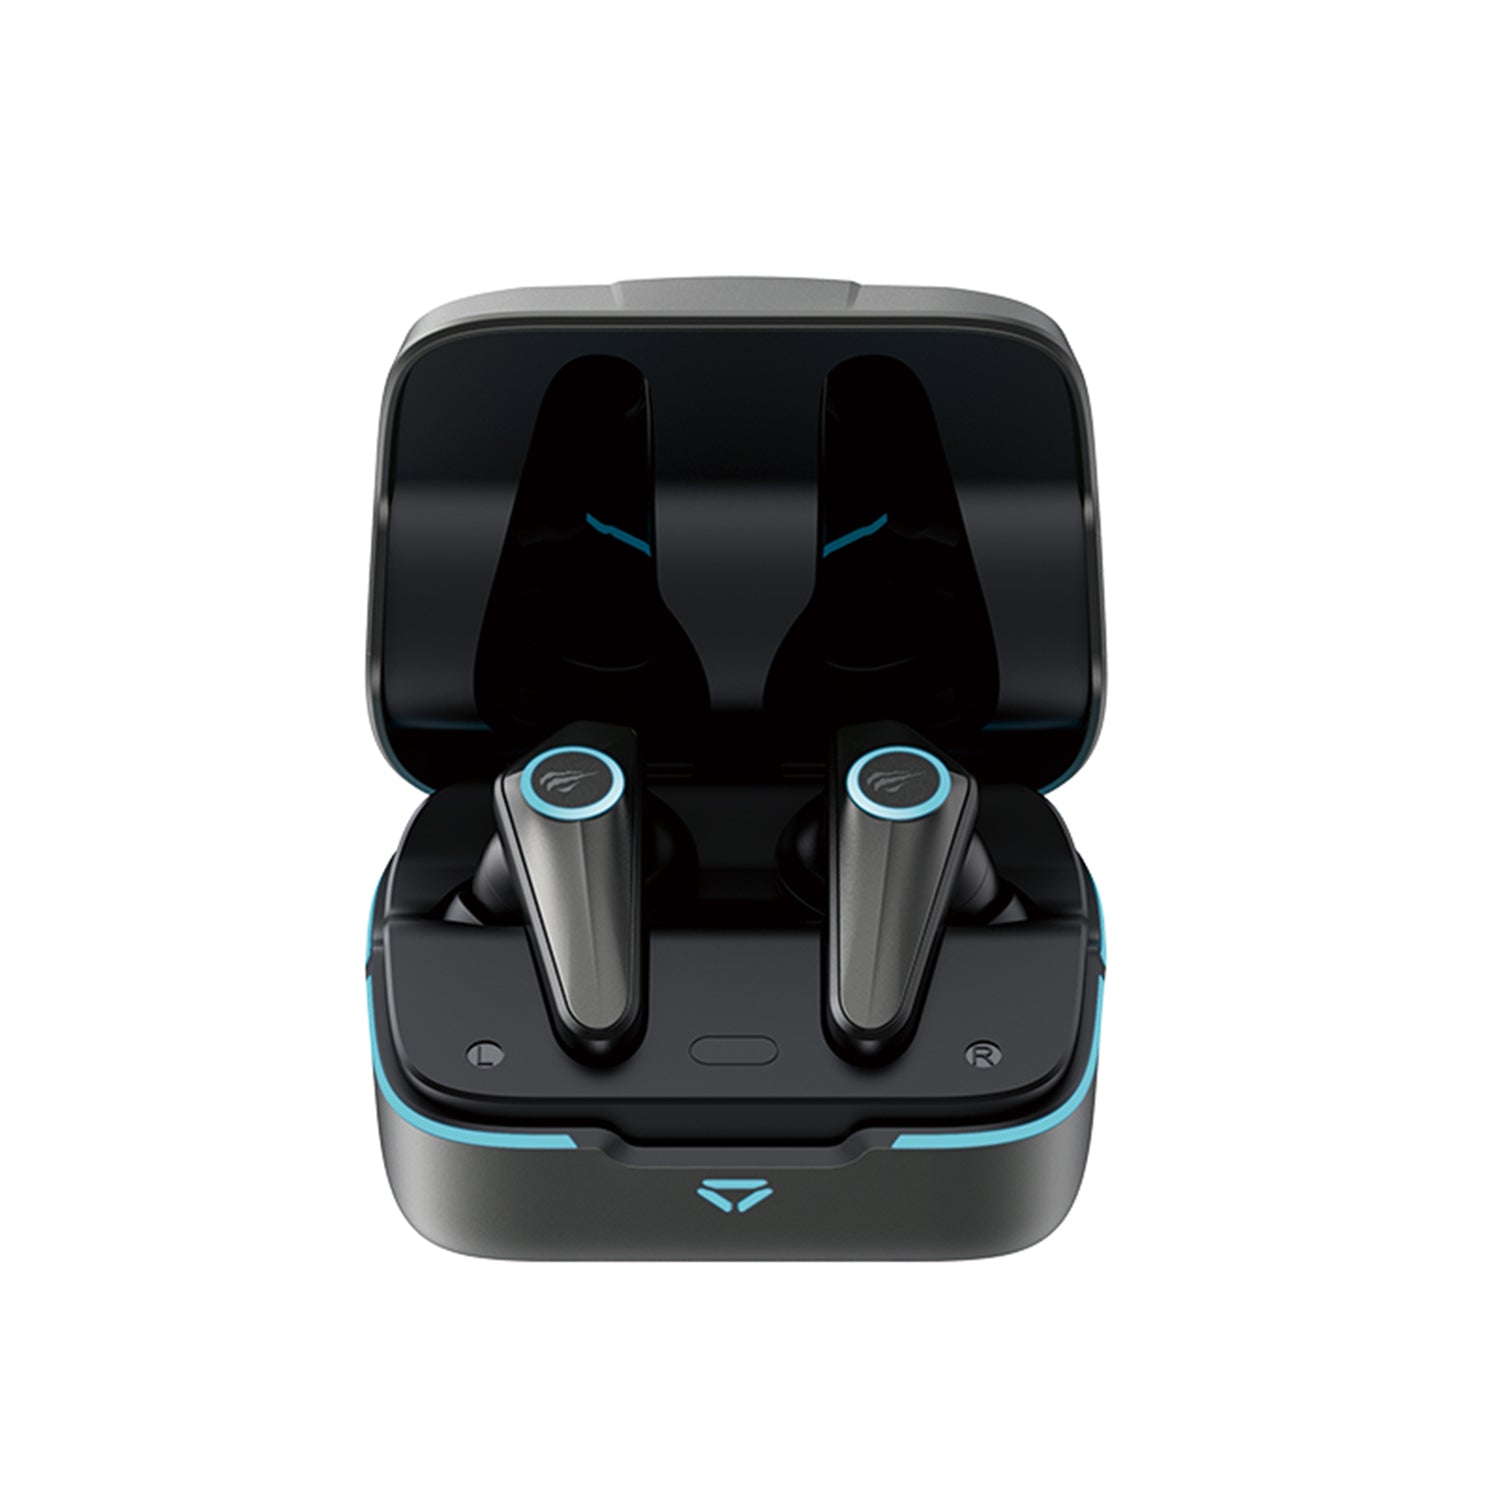 HAVIT TW952 Stereo True Wireless Earbuds with Gaming Music Dual Mode, Full Range Audio & LED Light